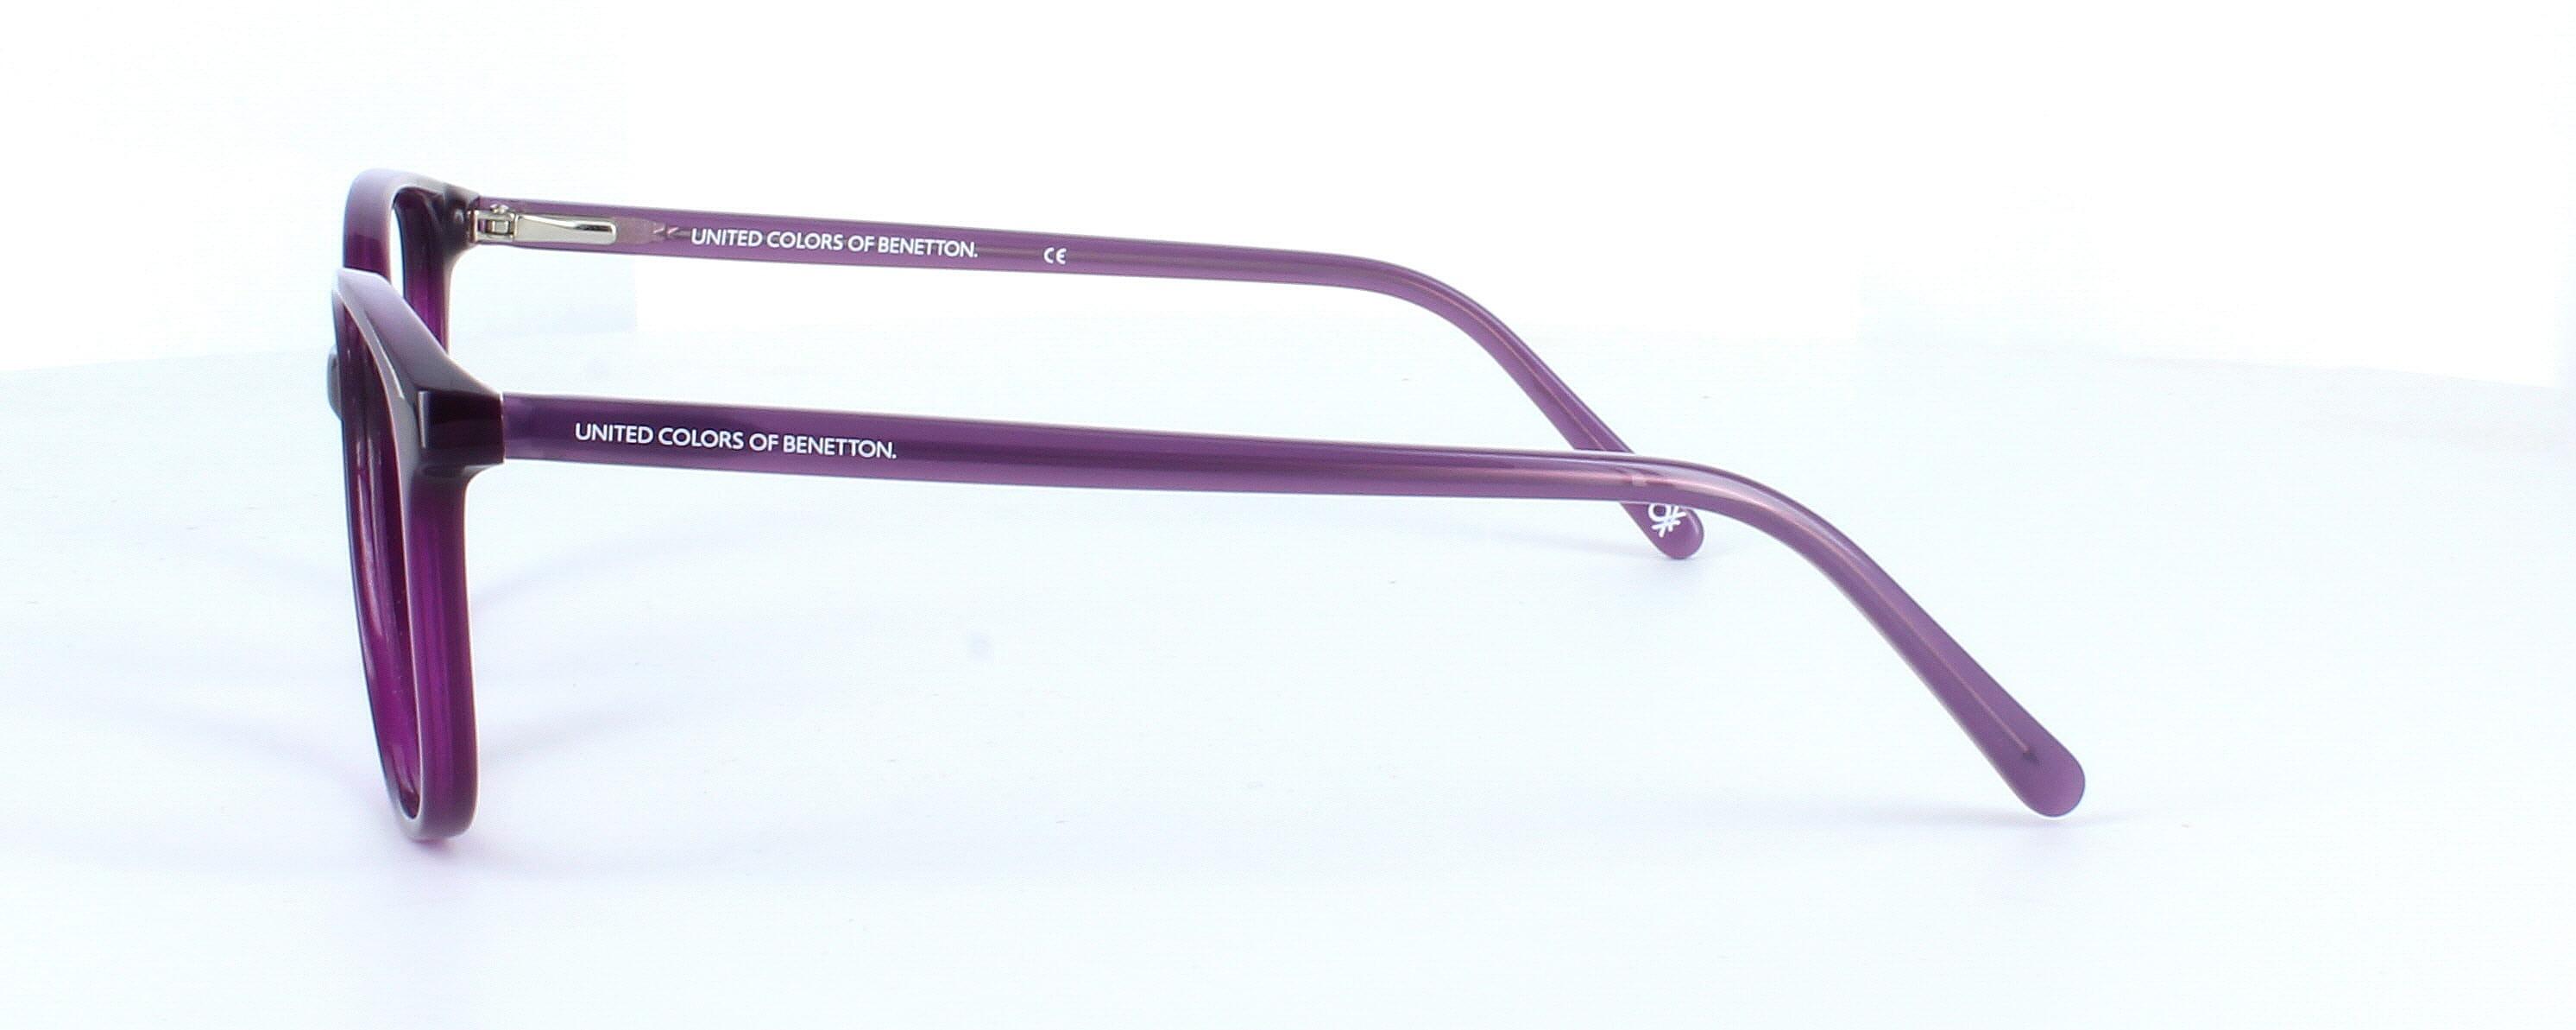 Benetton BEO1031 238 - Women's plastic glasses frame with purple front face and matching sprung hinged arms - image view 3